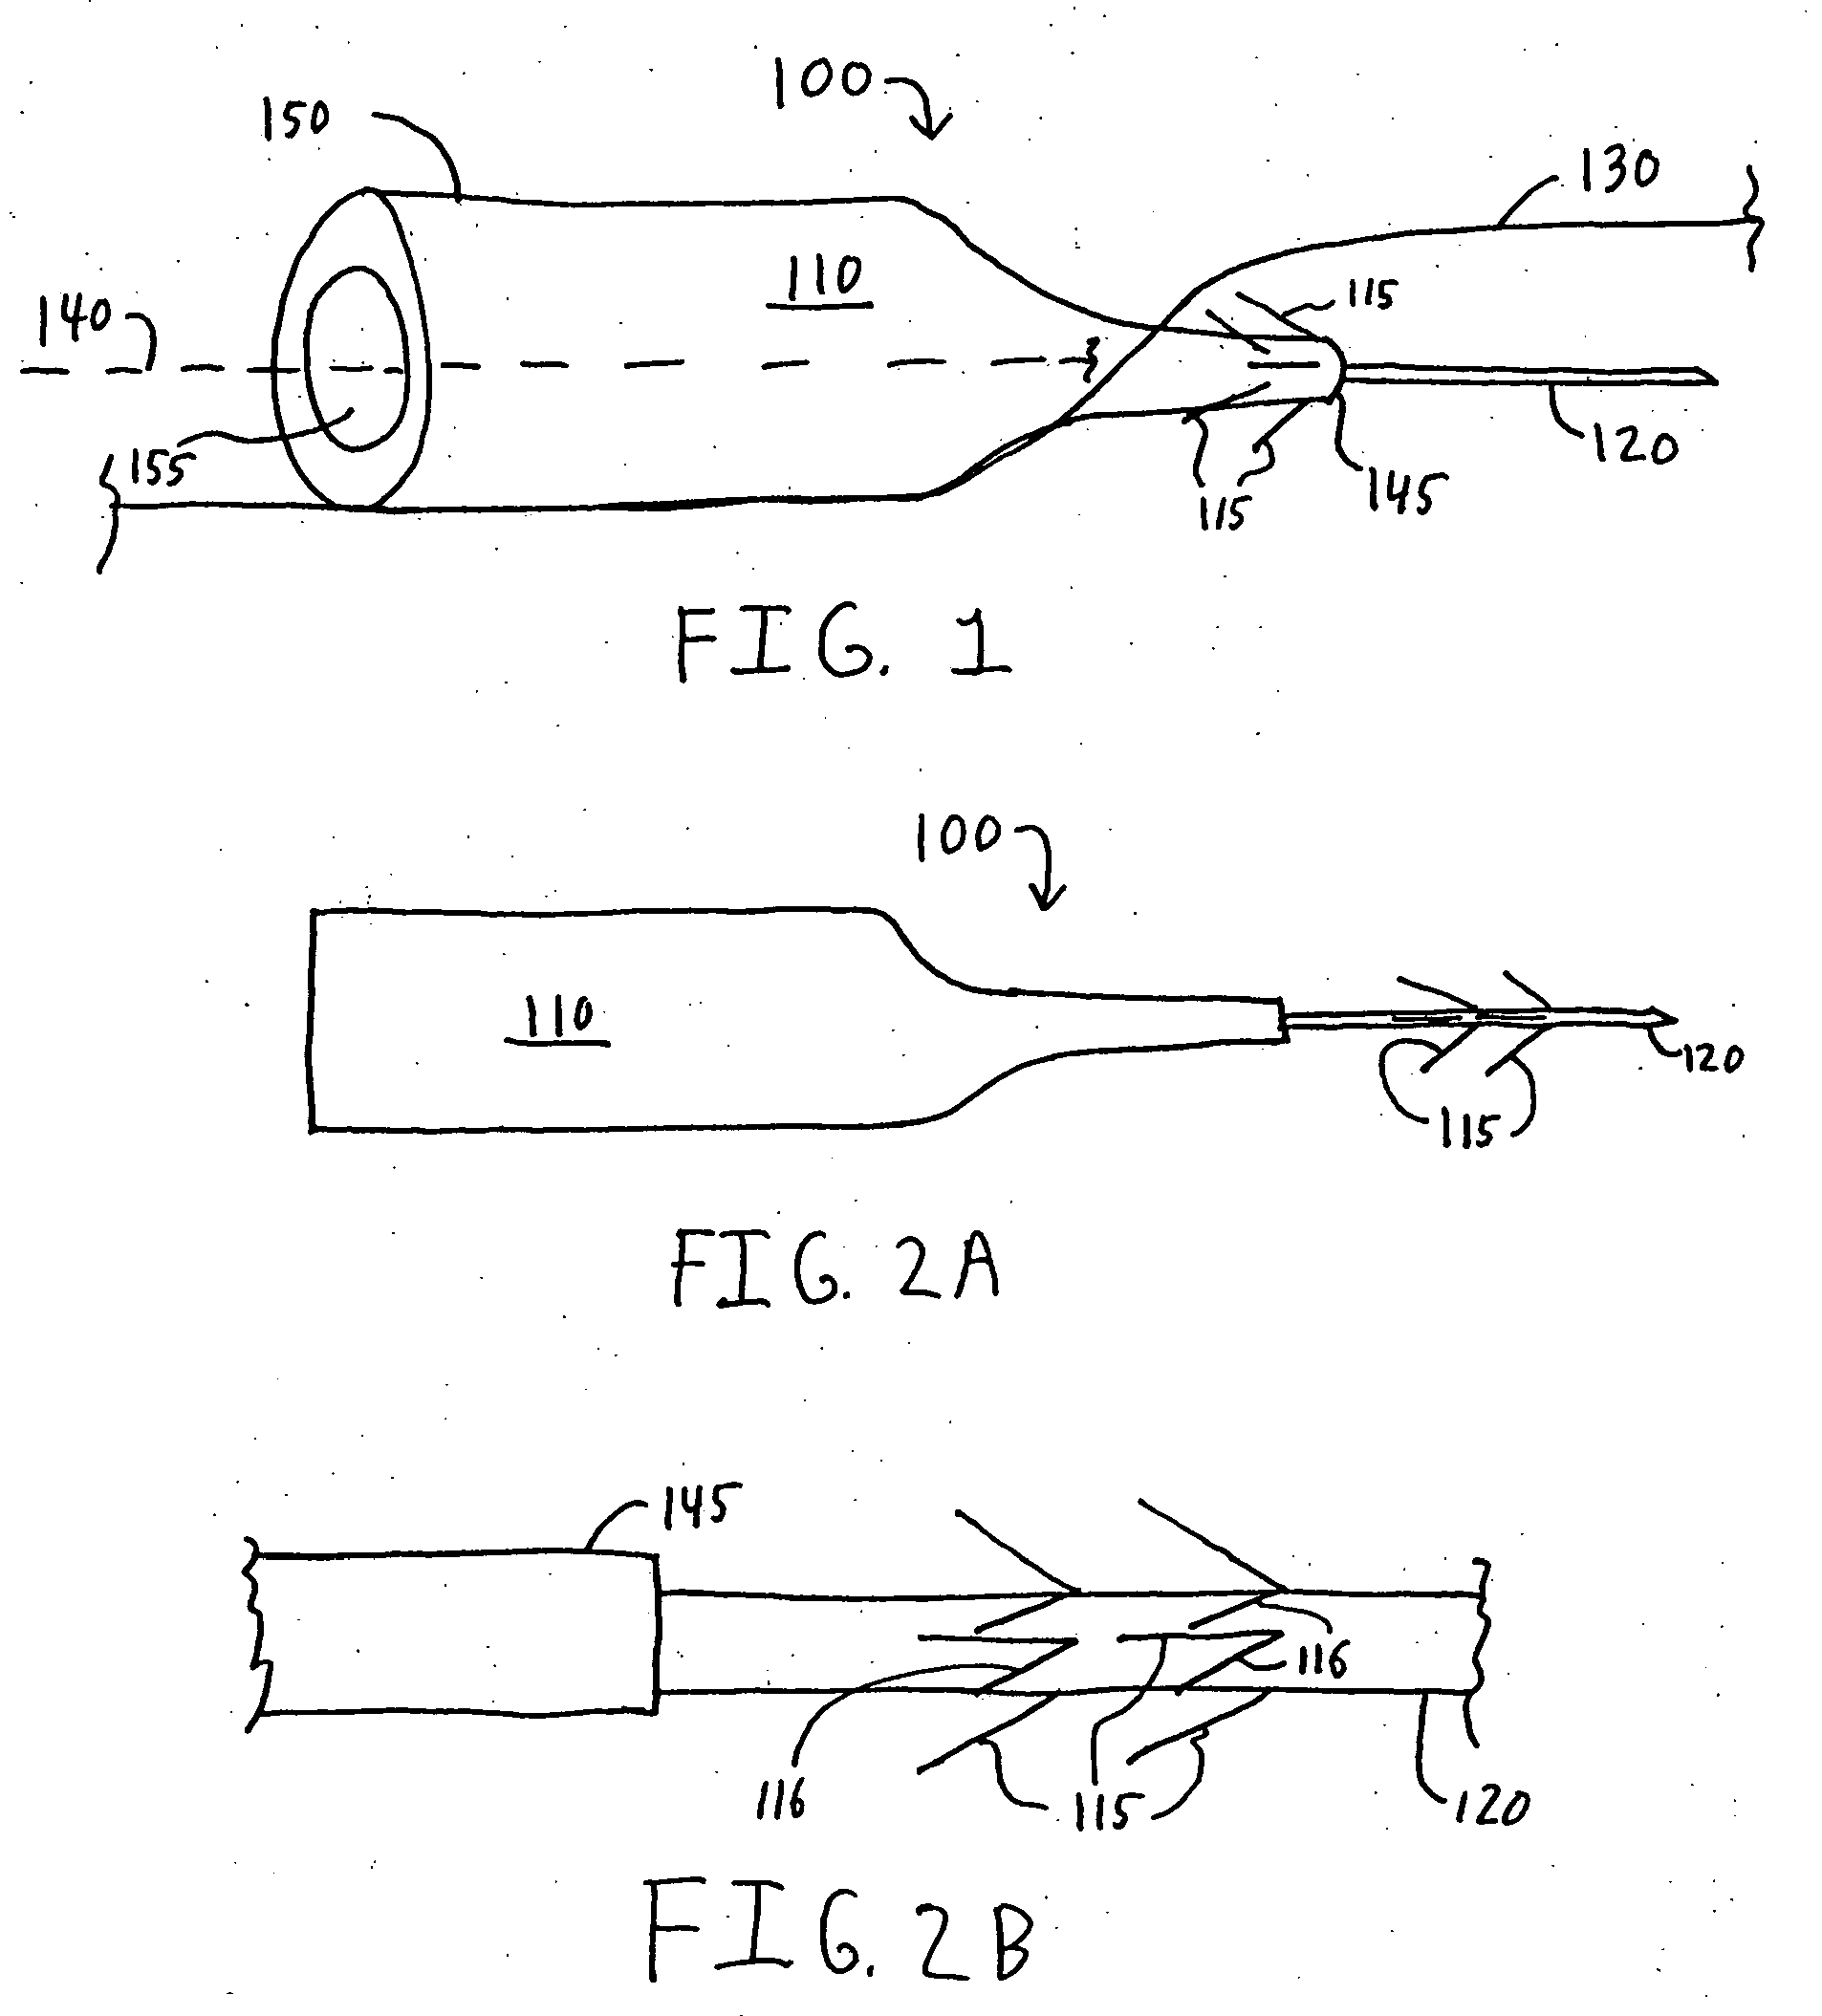 Self-anchoring catheter and method for using same